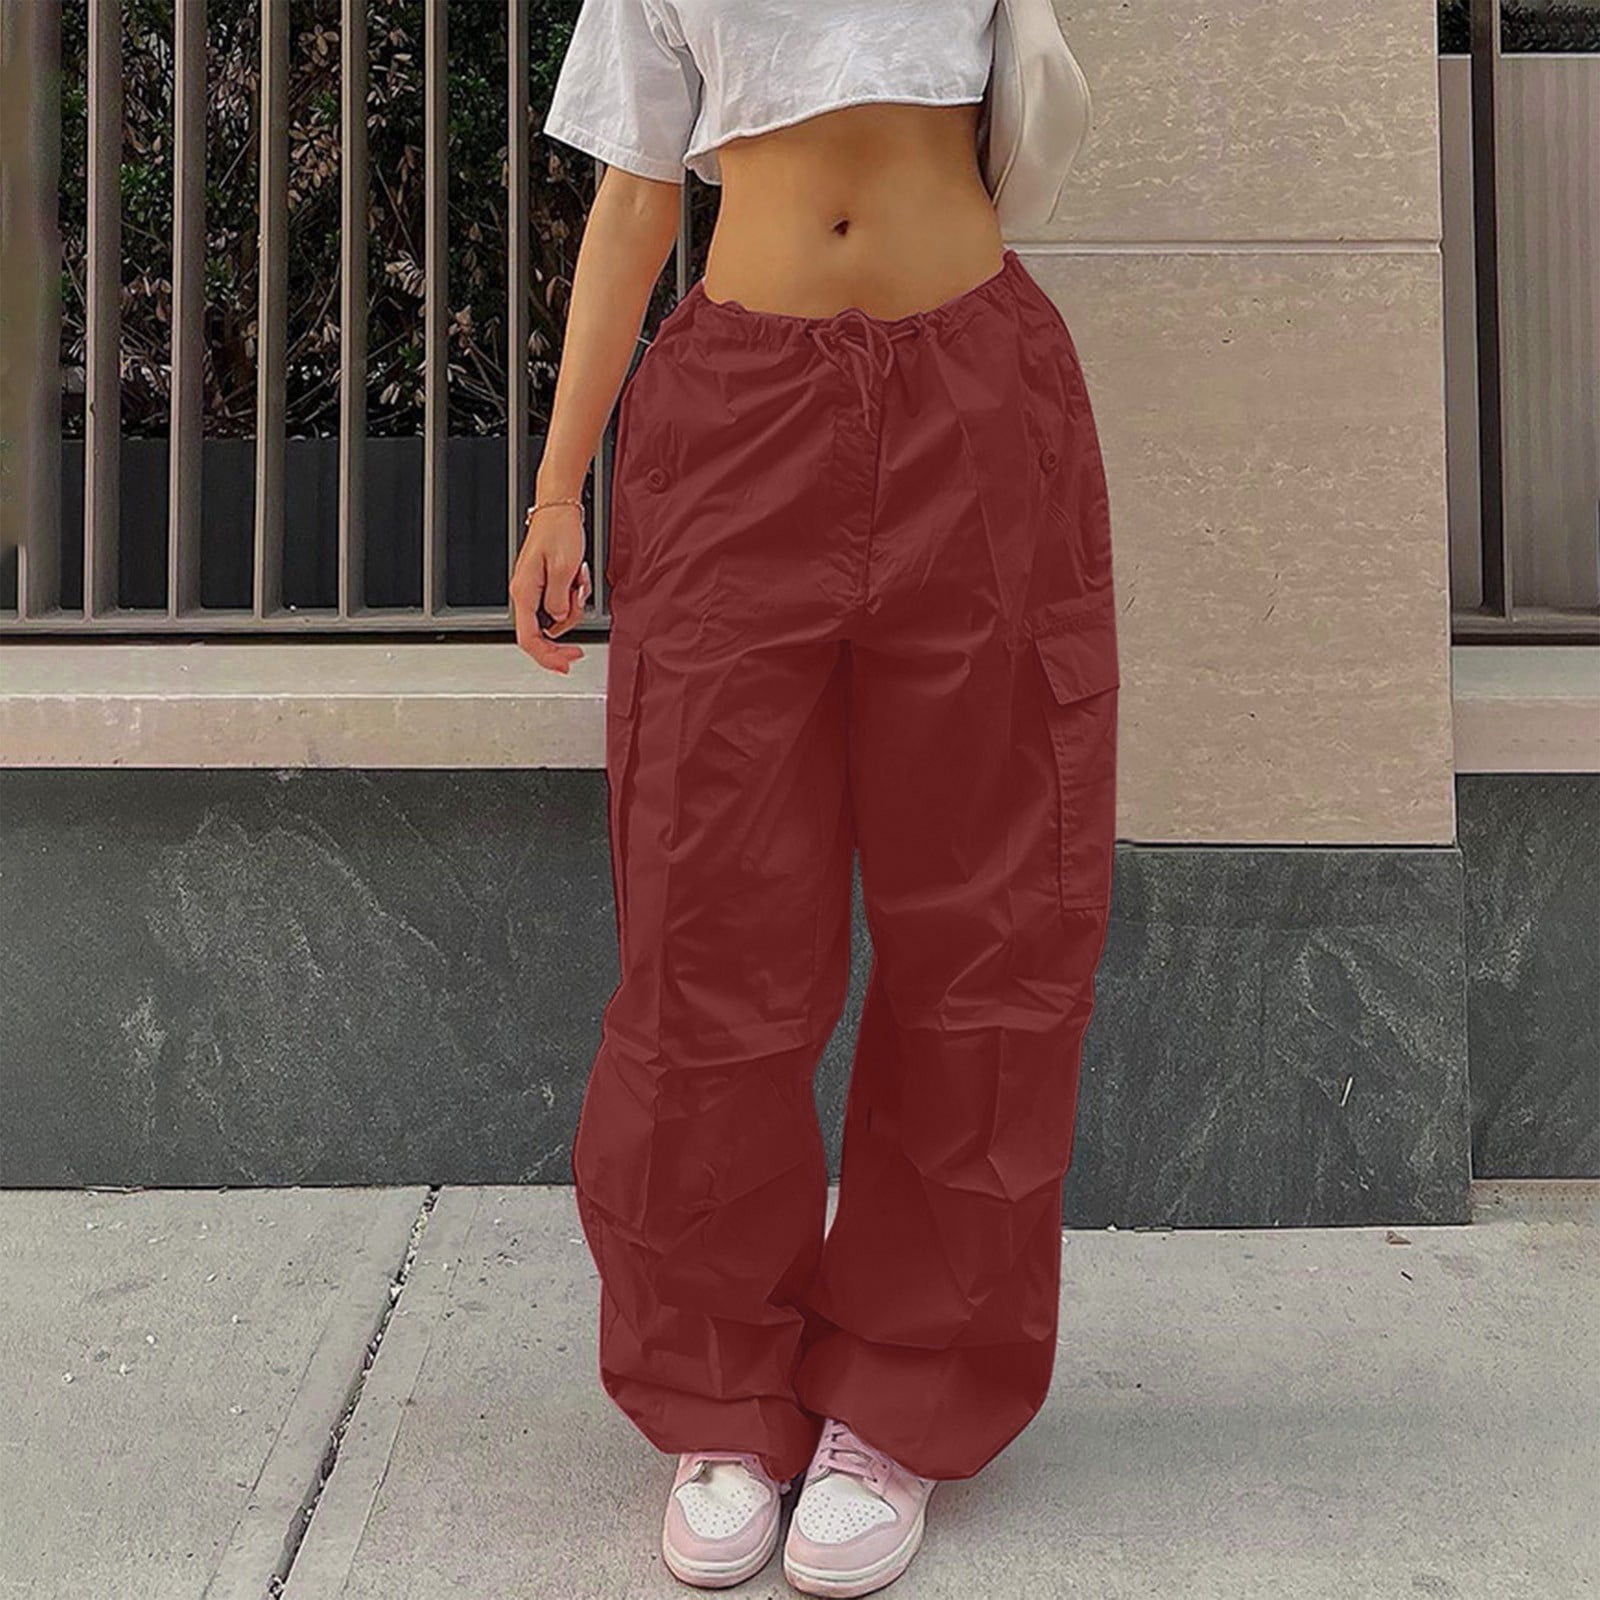 New Fashion Style Hip Hop Loose Pants Wine Red Jeans Baggy Cargo